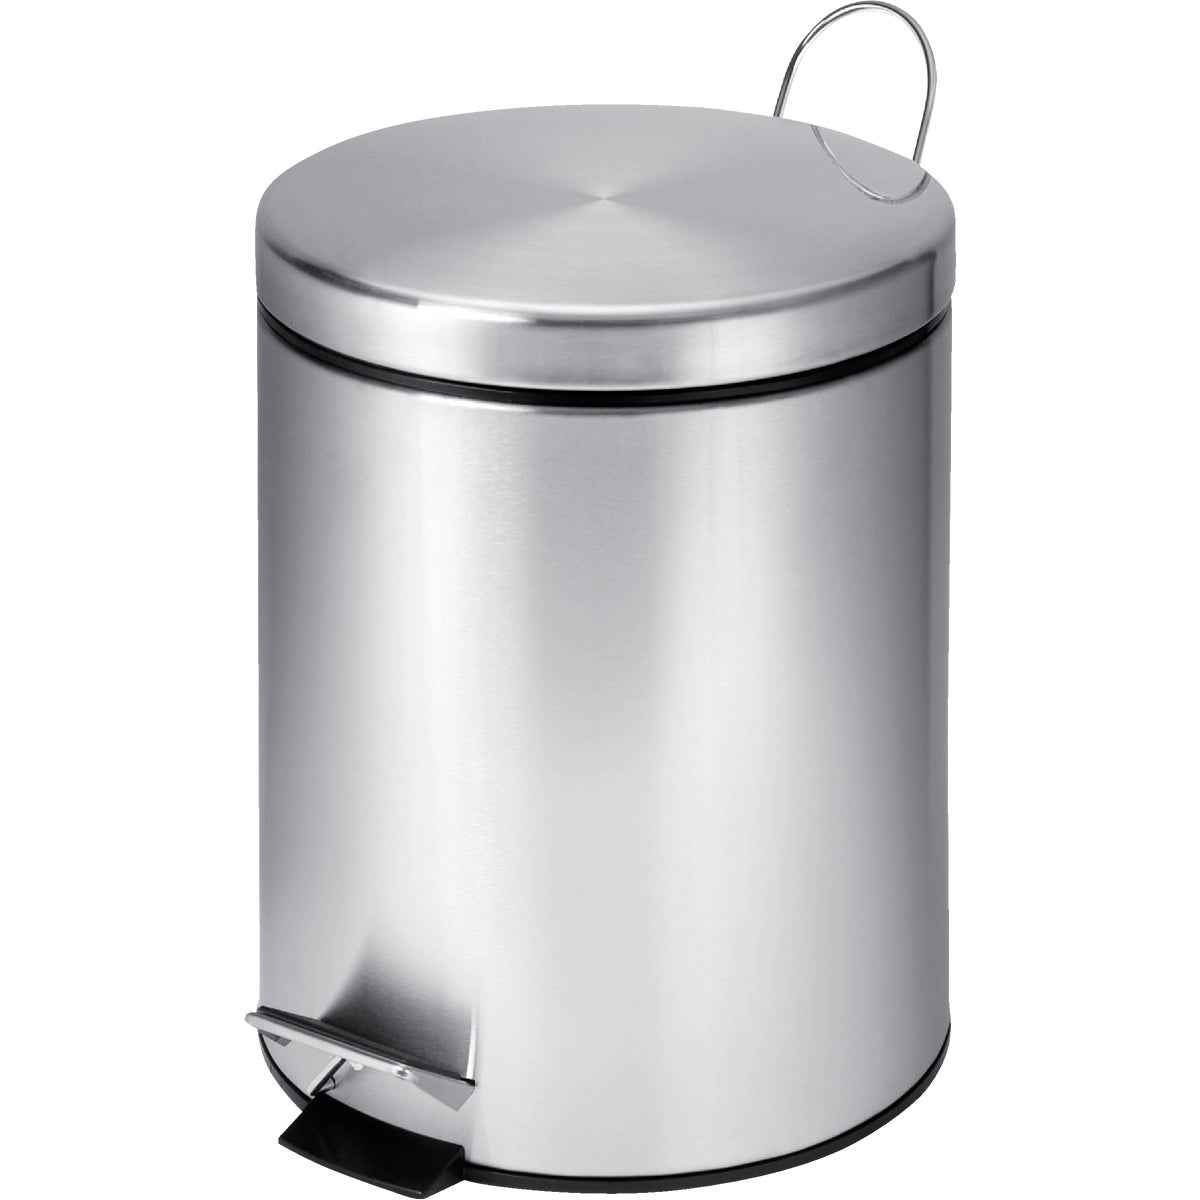 Item 601533, Stainless steel step pedal open round wastebasket with removable inner 